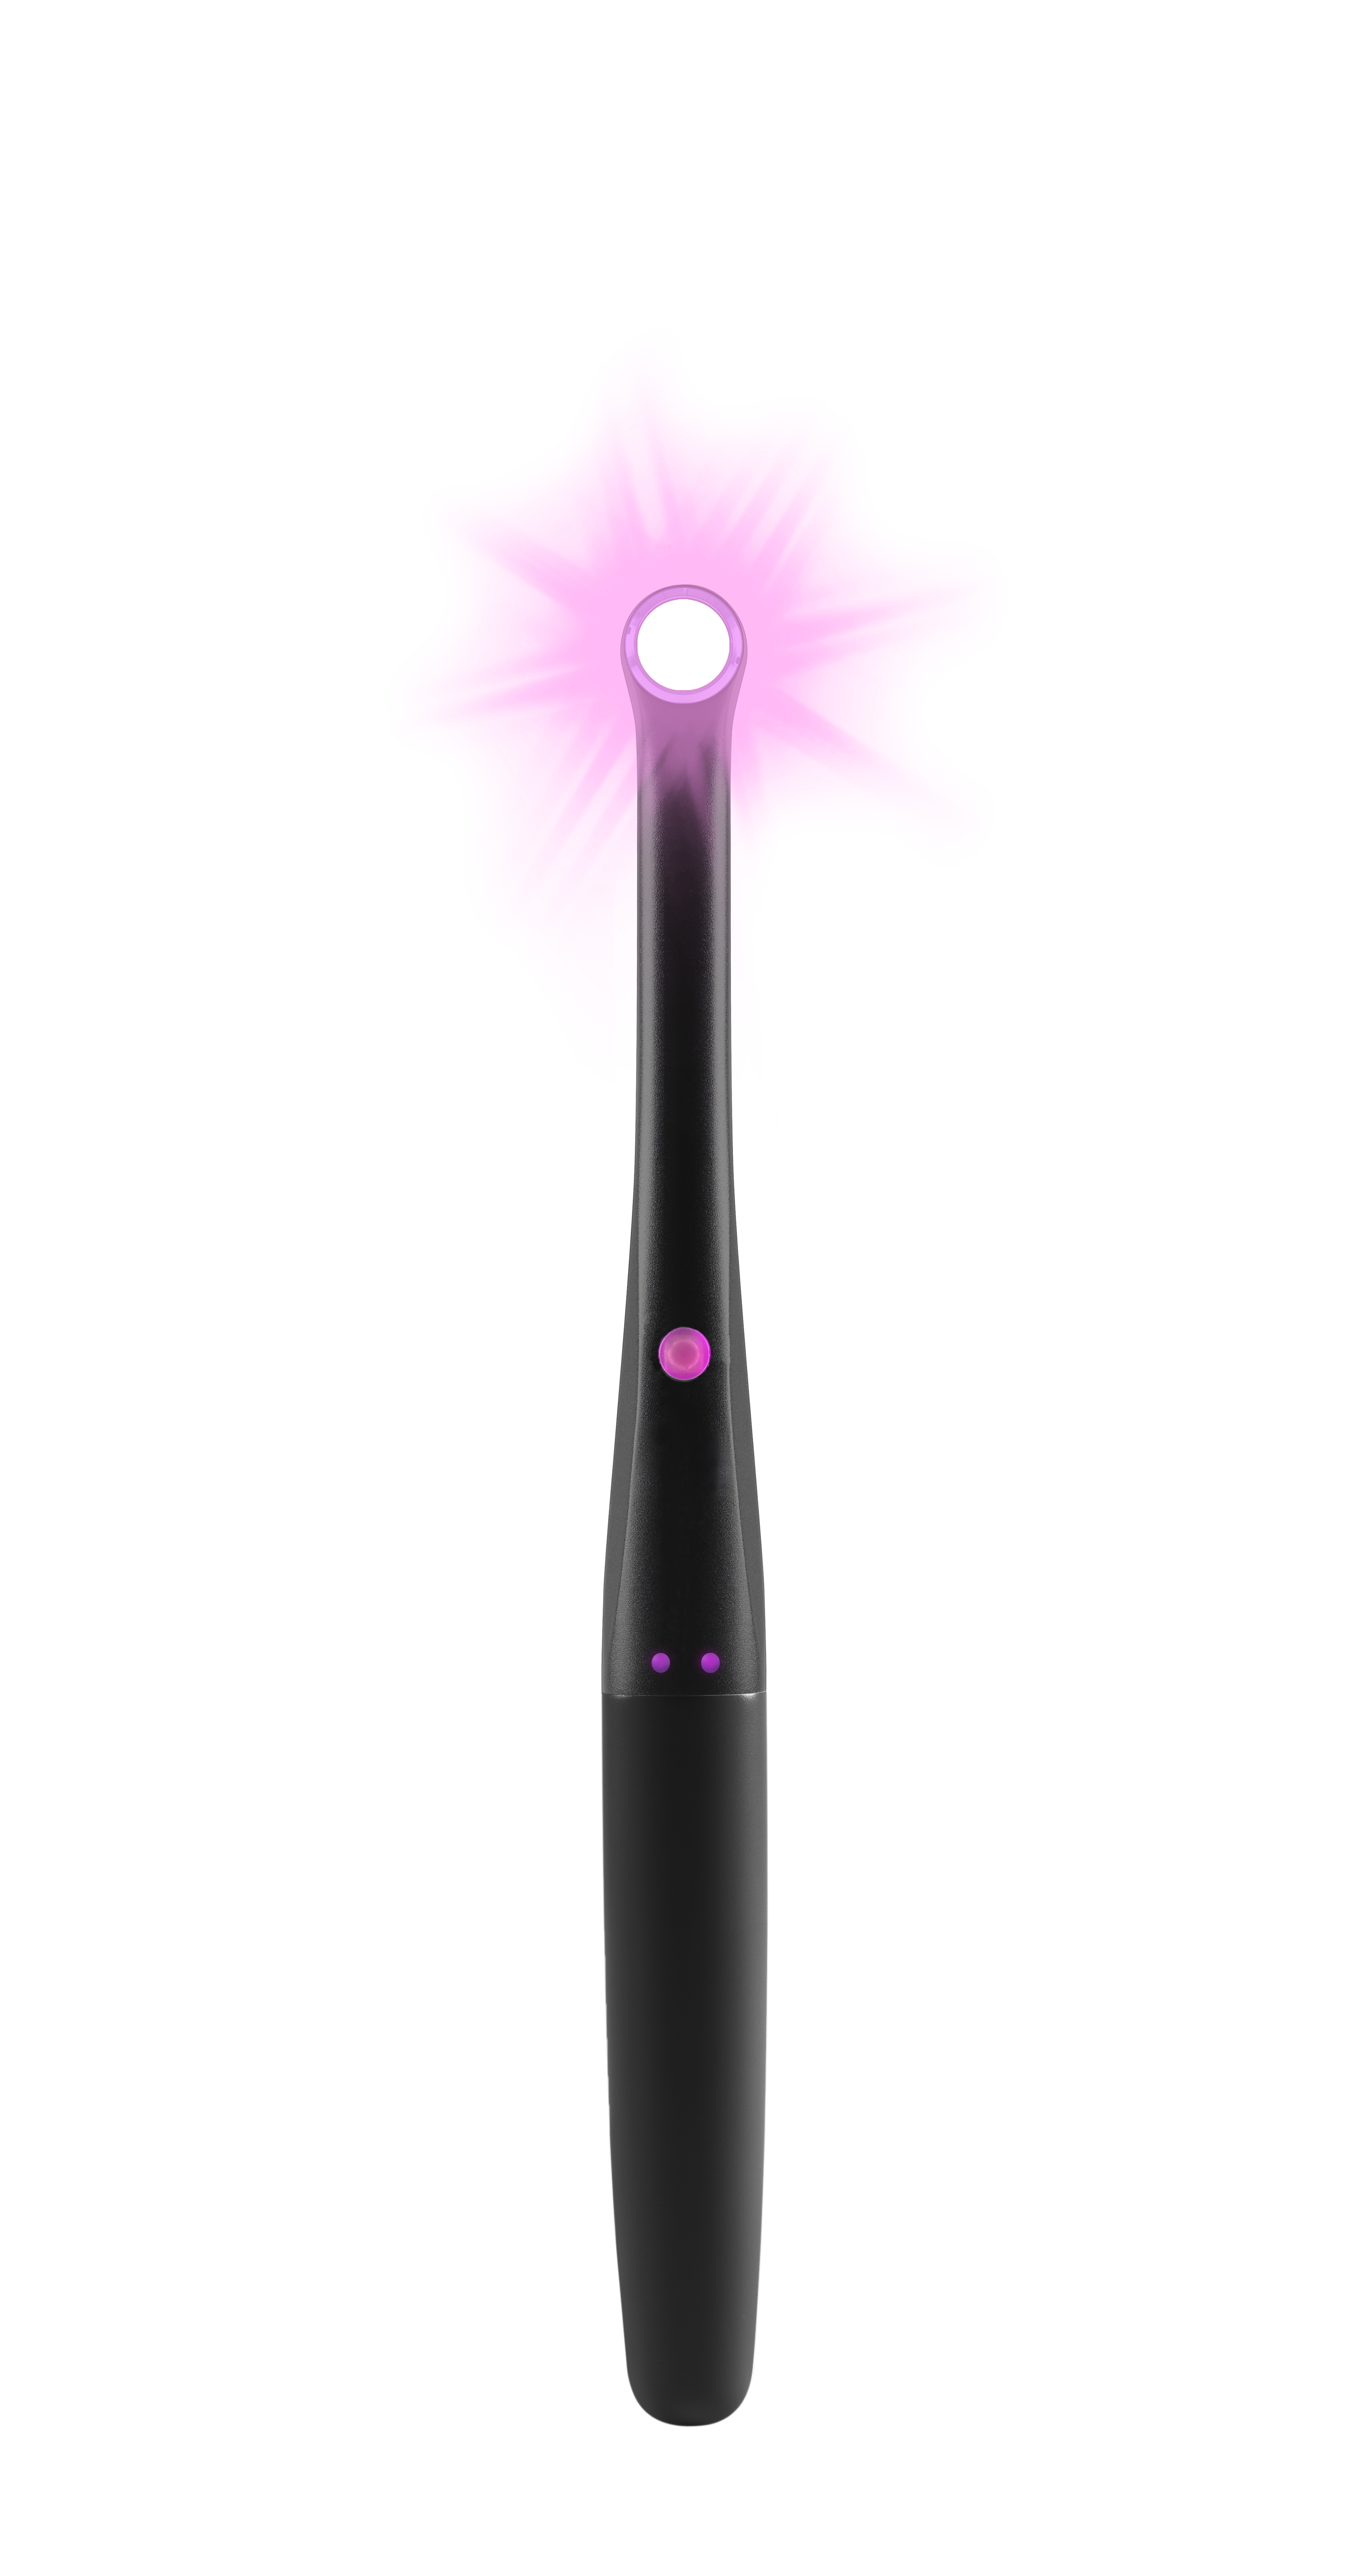 PinkWave curing light from Vista Apex